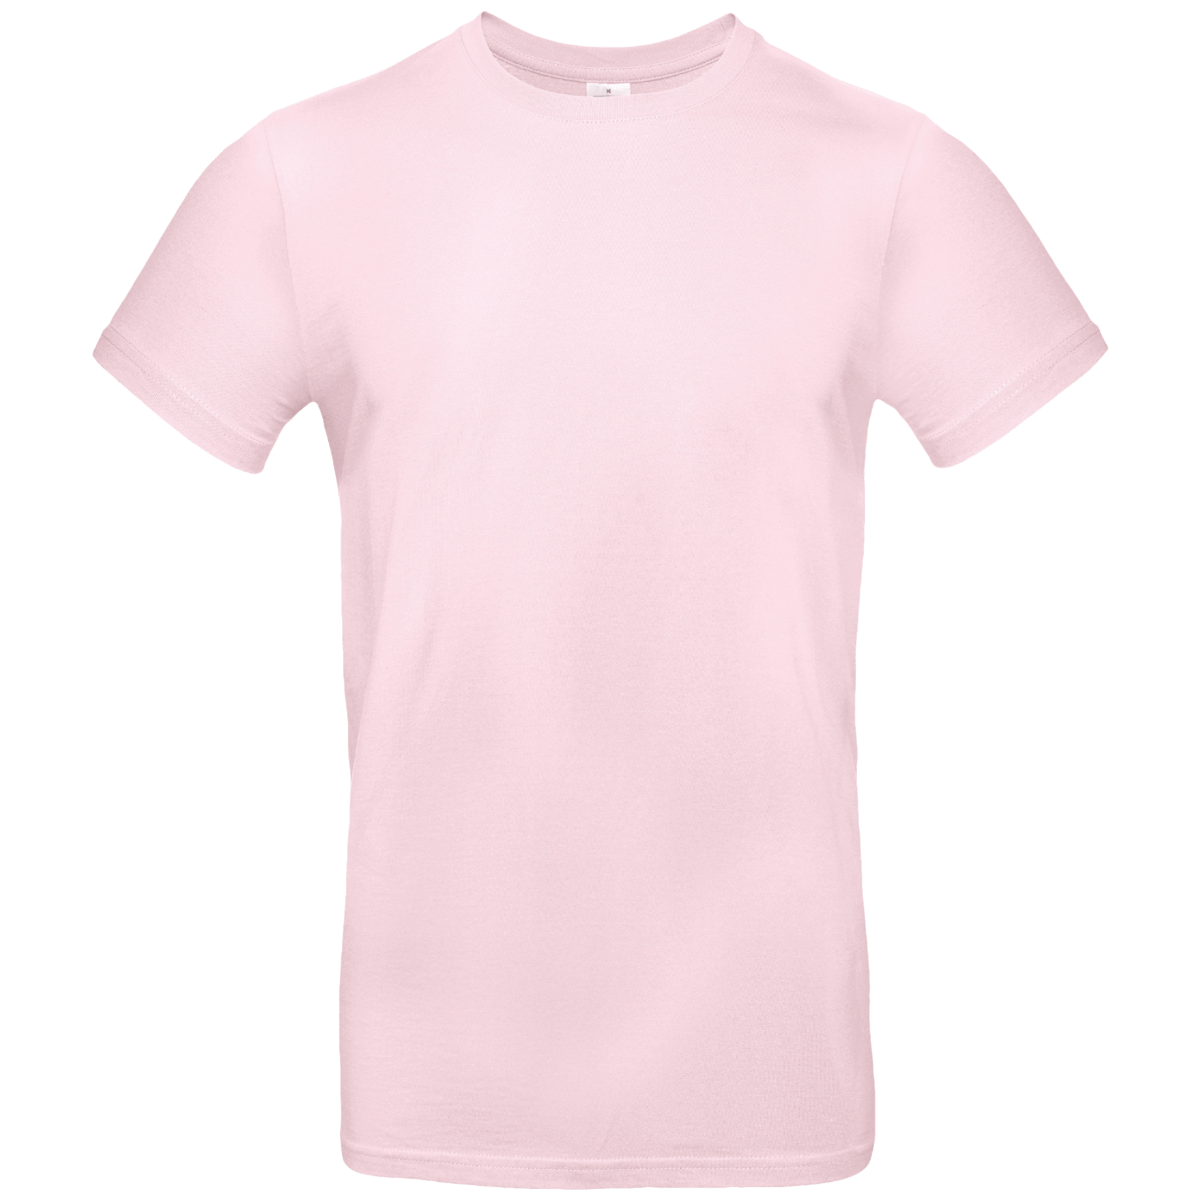 T-Shirt B&c 190 Personnalisable Sur Tunetoo Orchid Pink